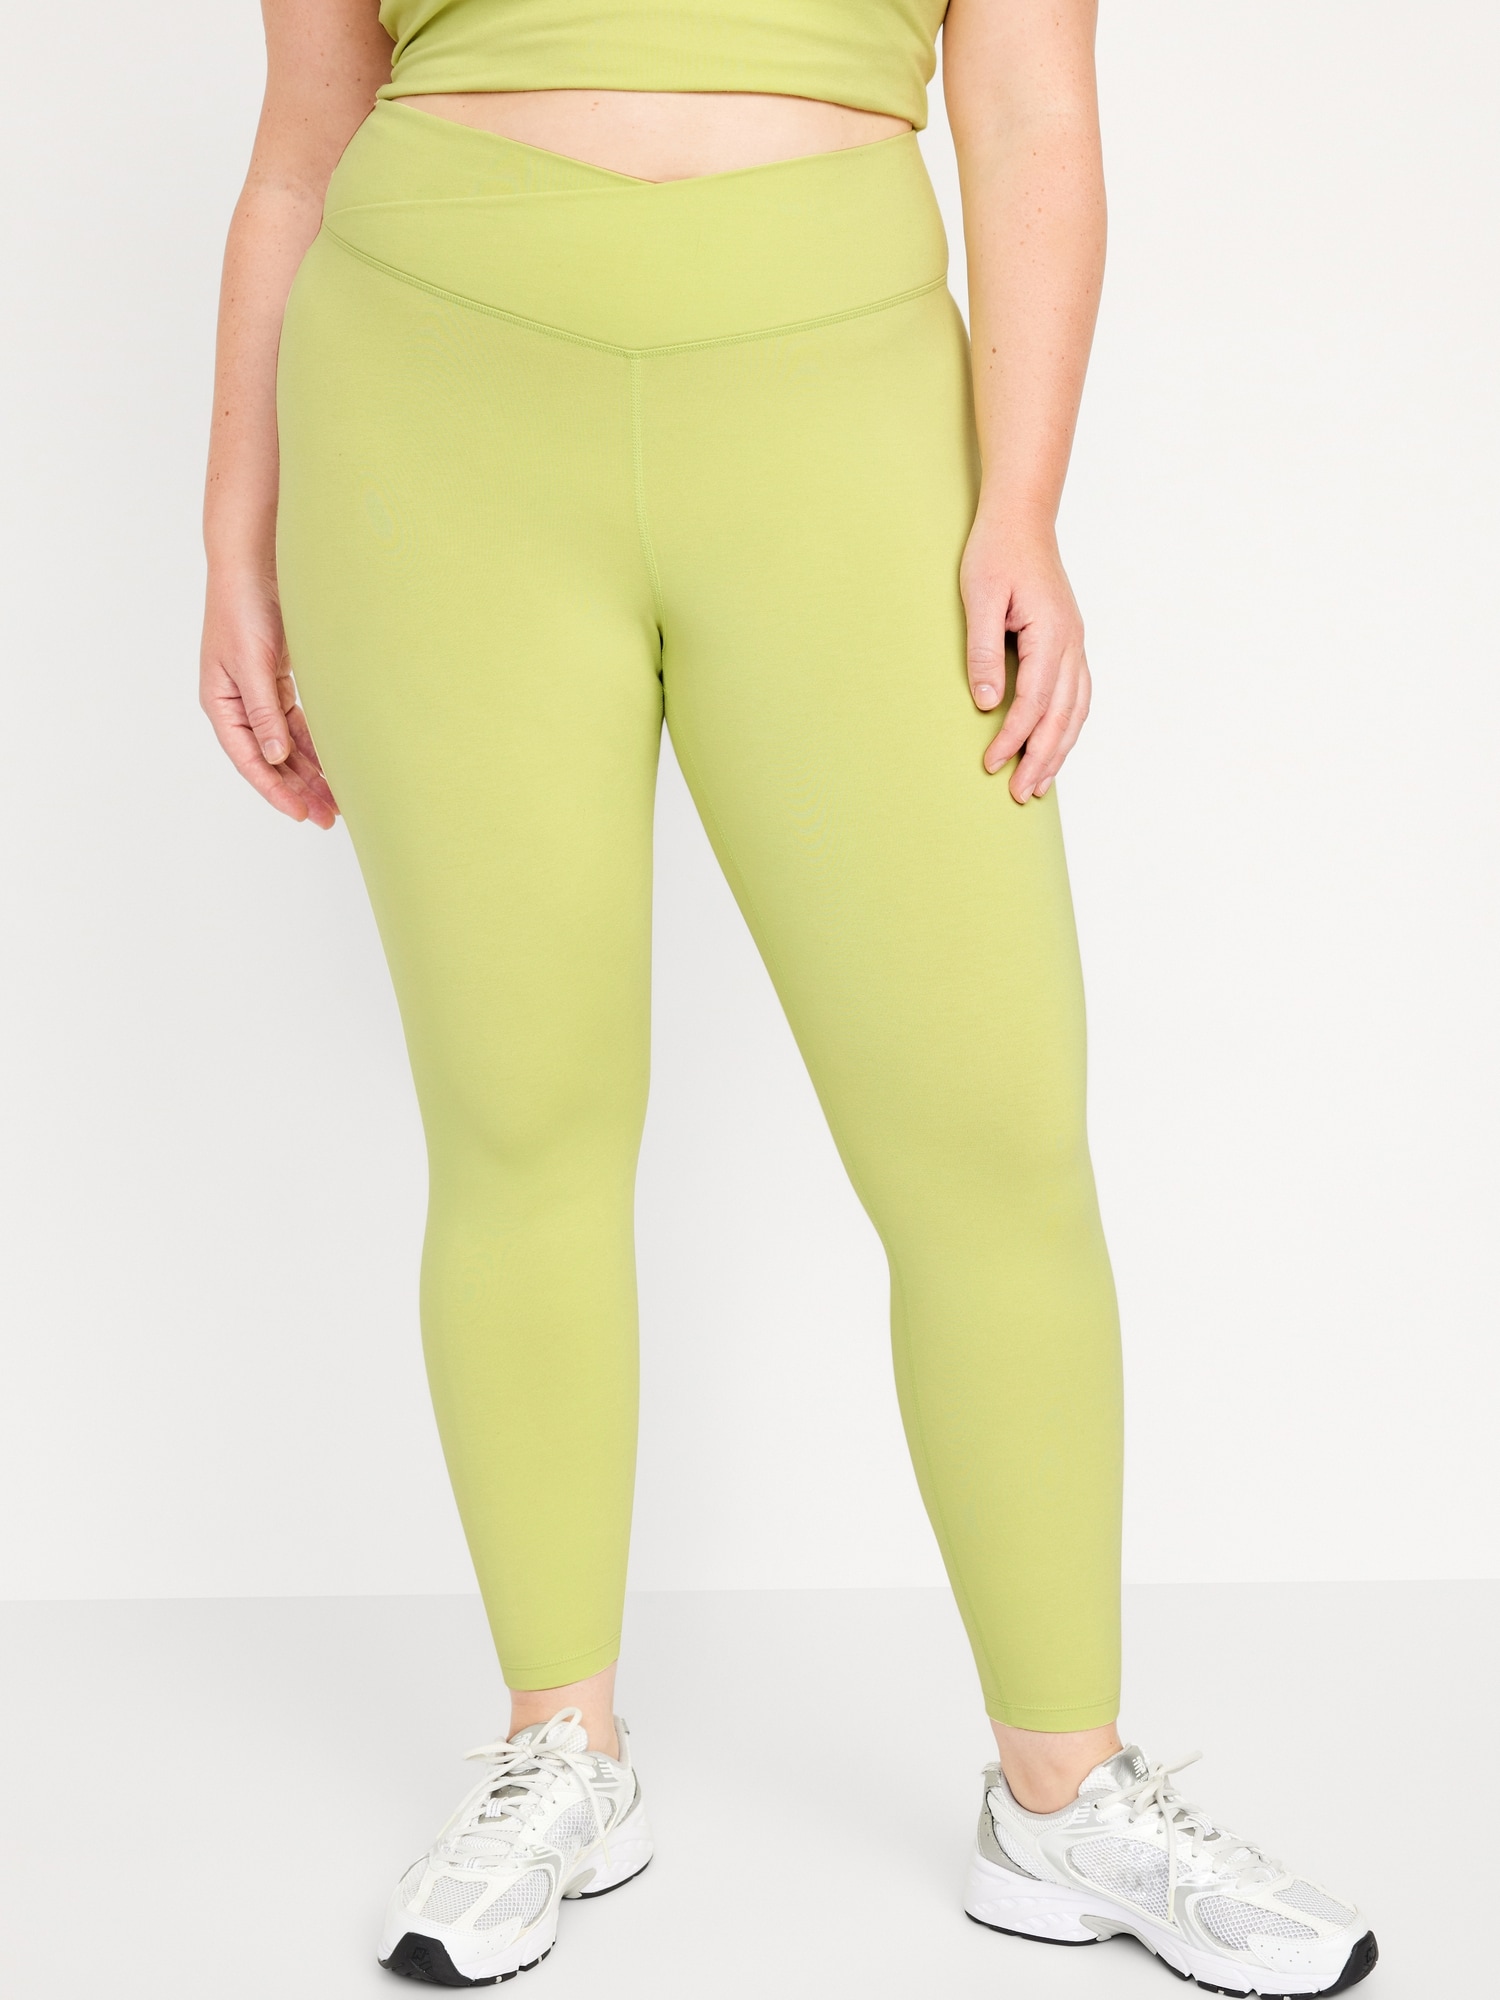 Plus Size Pastel Yellow Classic High Waisted Leggings